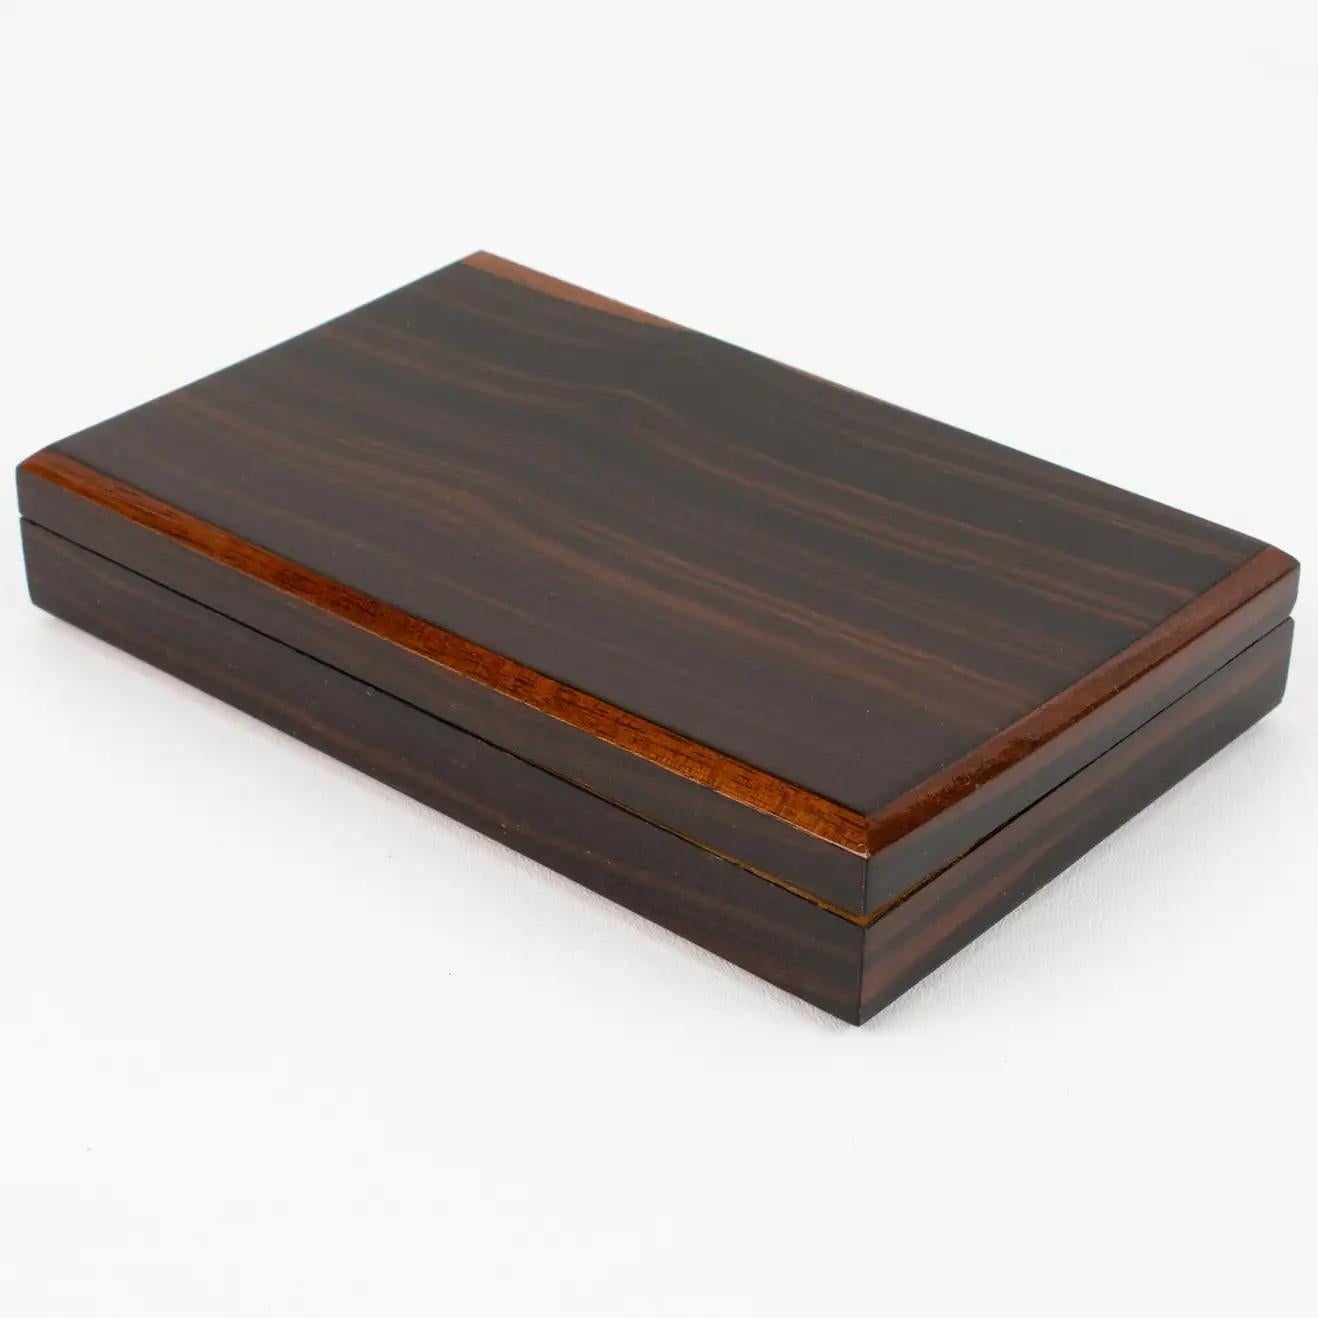 This elegant French Art Deco modernist decorative lidded box boasts a minimalist yet refined and sophisticated shape with varnish Macassar wood ornate with tropical wooden edging trims. The interior is lined with tropical wood. There is no visible